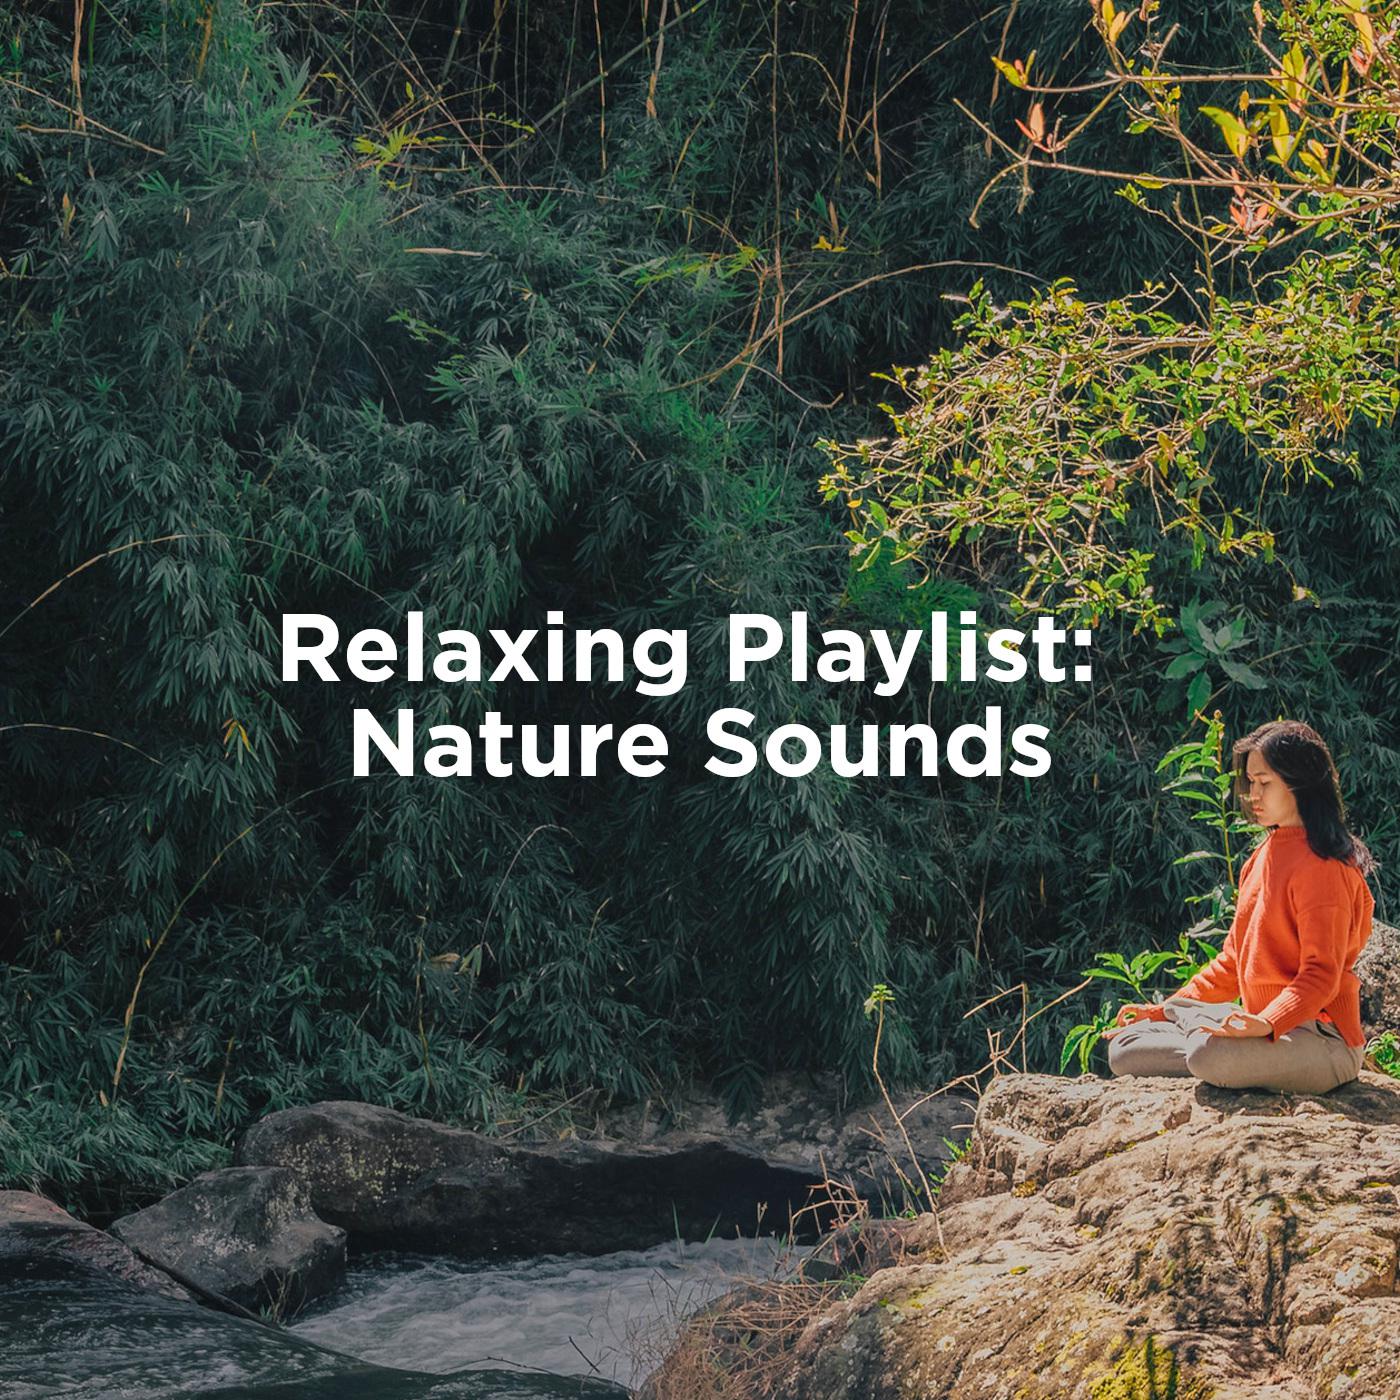 Relaxing Playlist: Nature Sounds